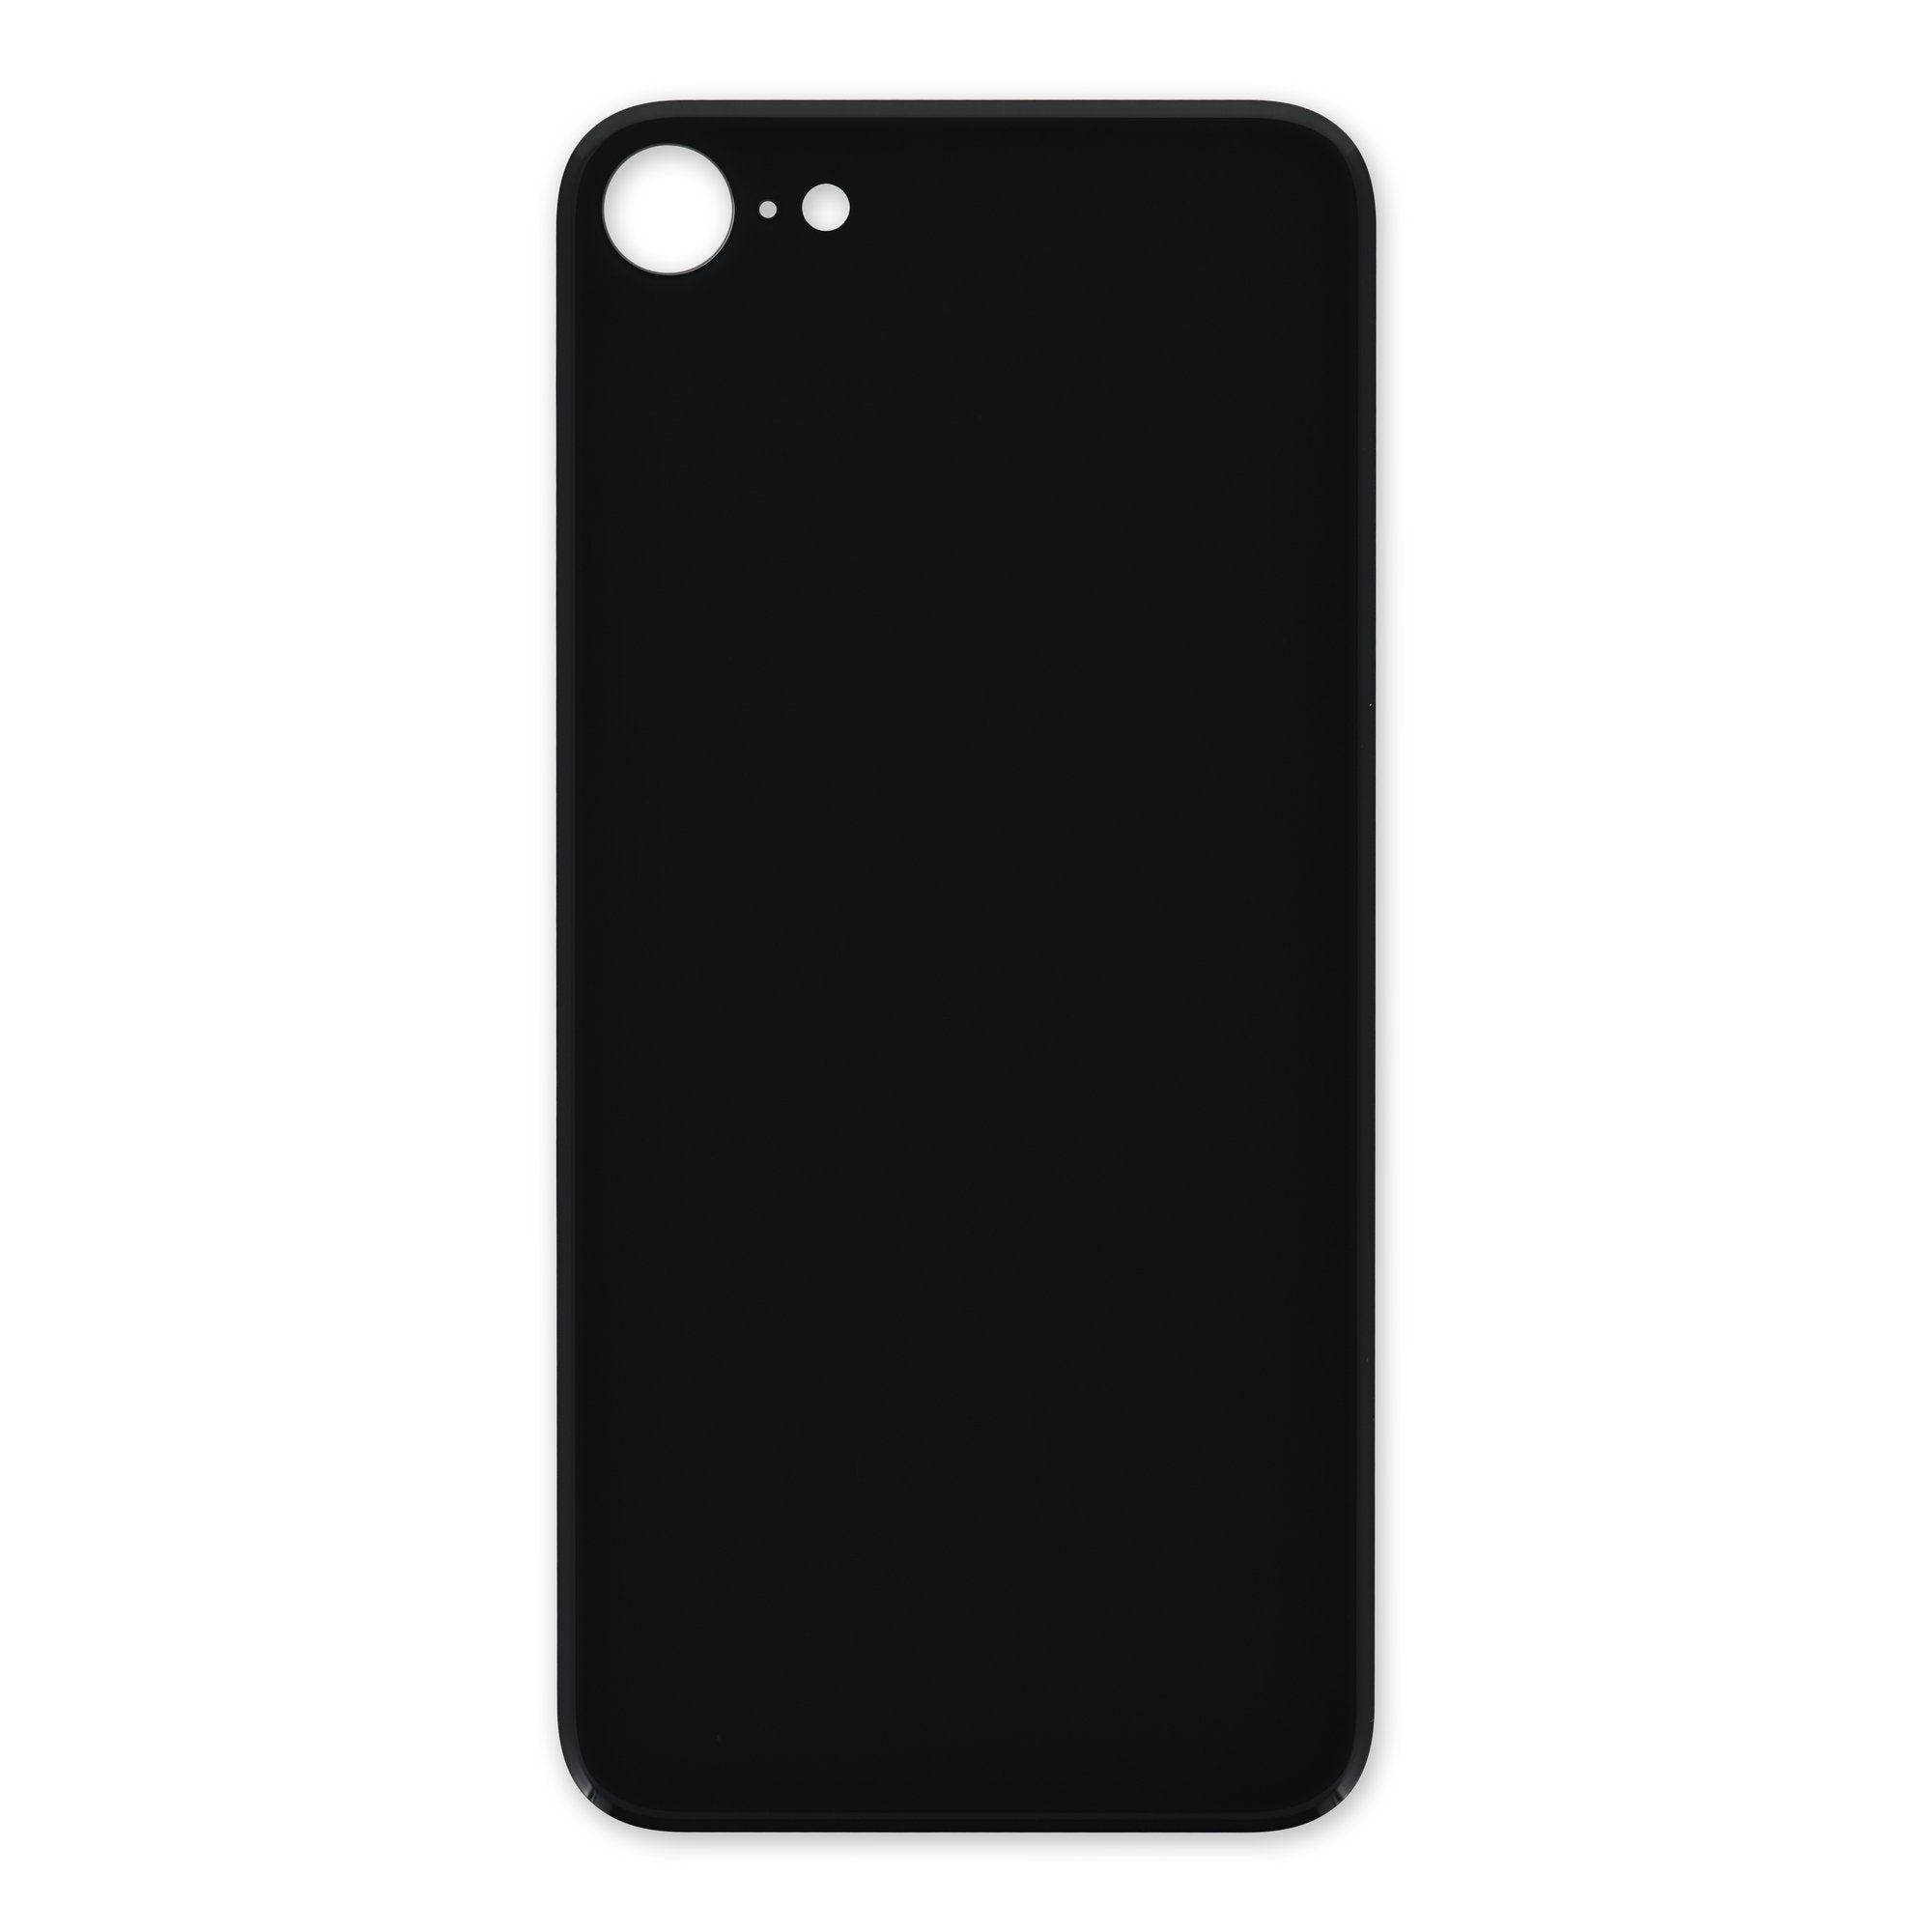 iPhone 8 Aftermarket Blank Rear Glass Panel Black New